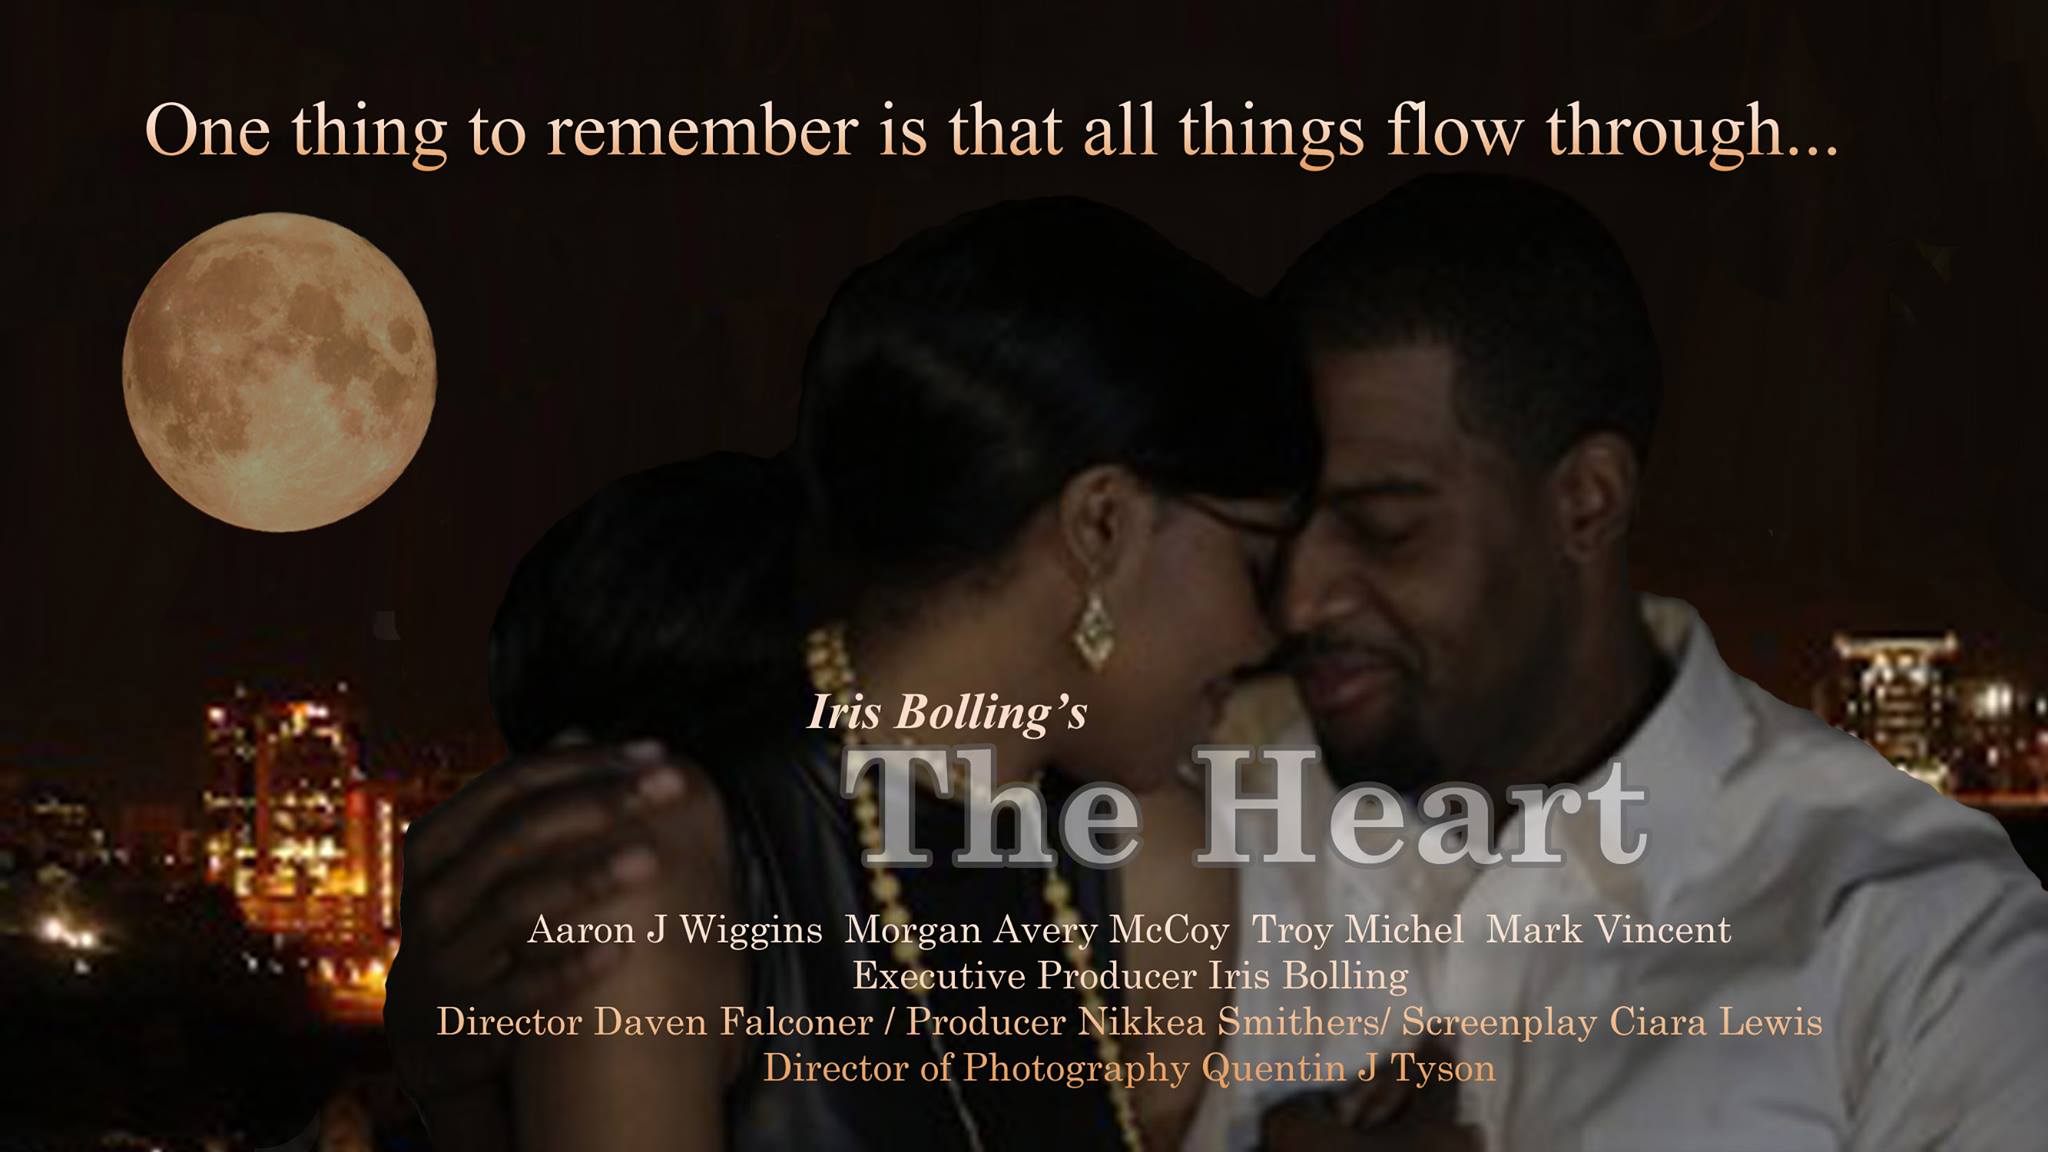 Title Cover for The Heart TV Series. Feb 2014 release date.